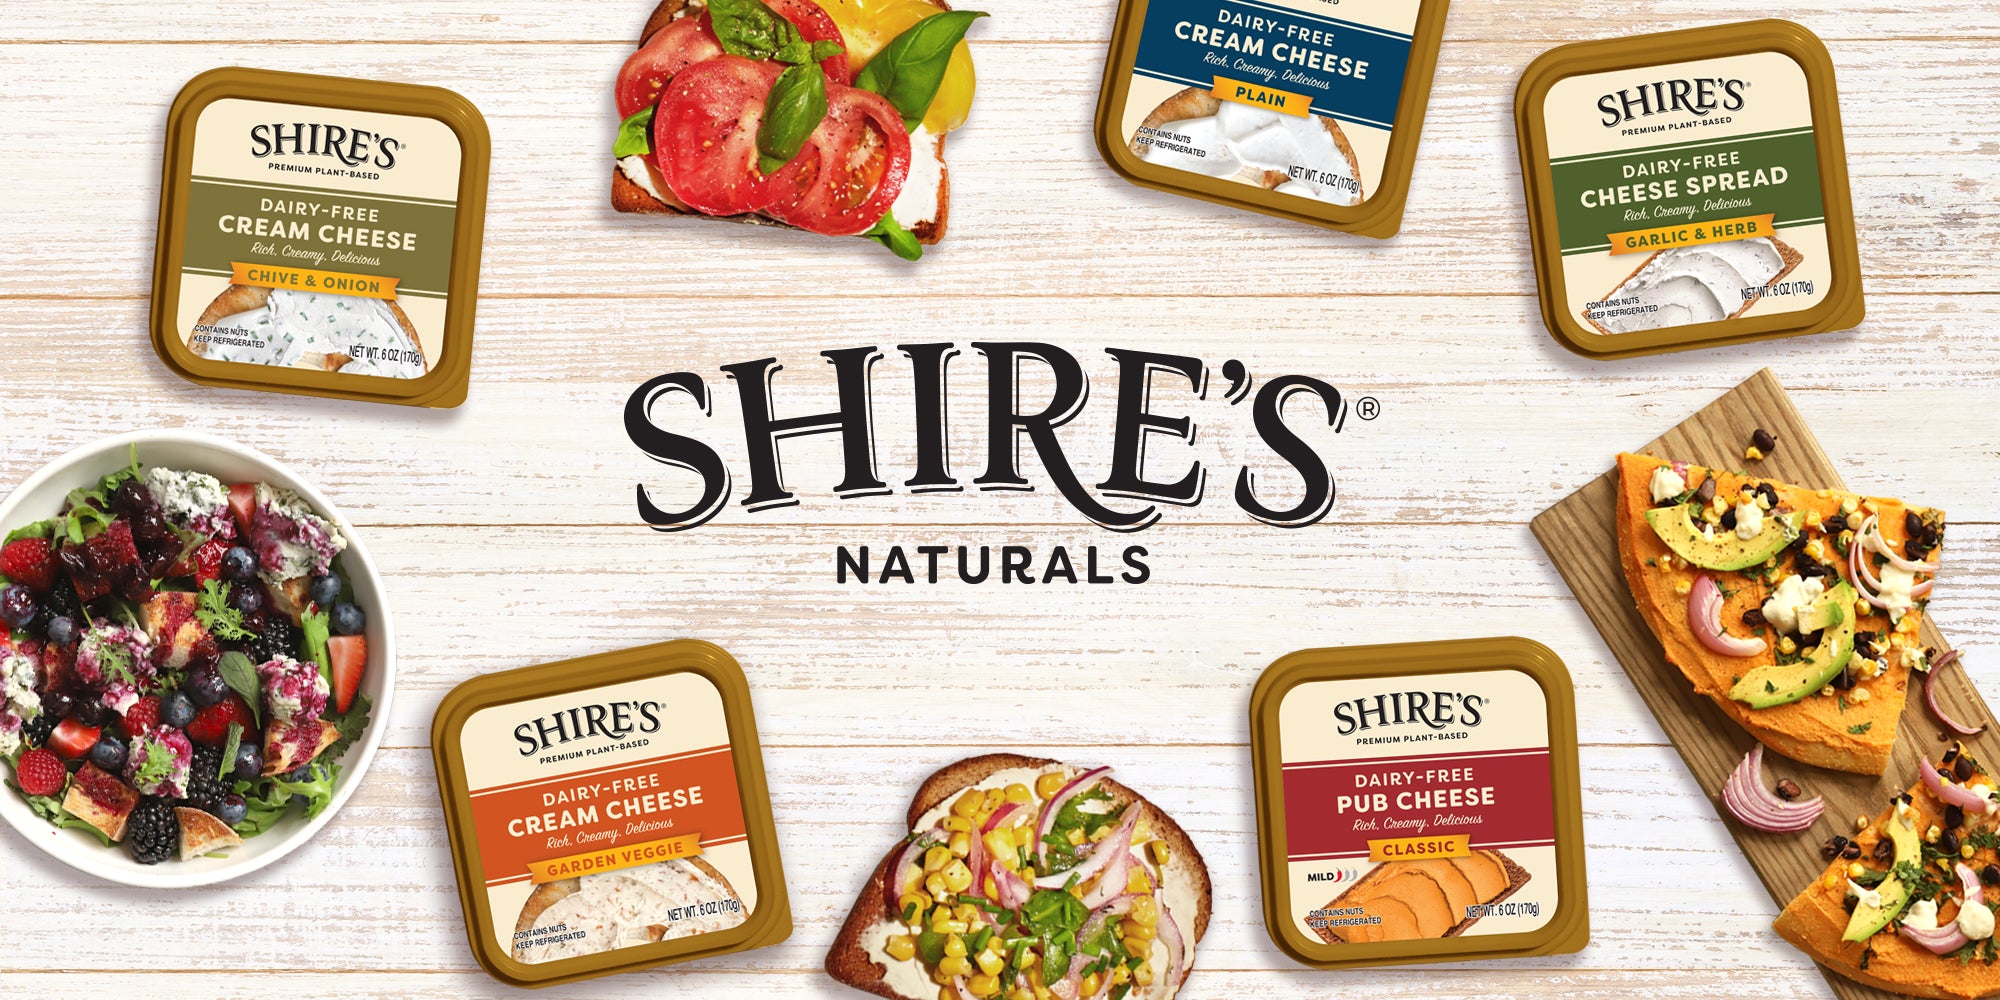 Image of Shire's Naturals Products: Cream Cheese, Cheese Spread & Pub Cheese